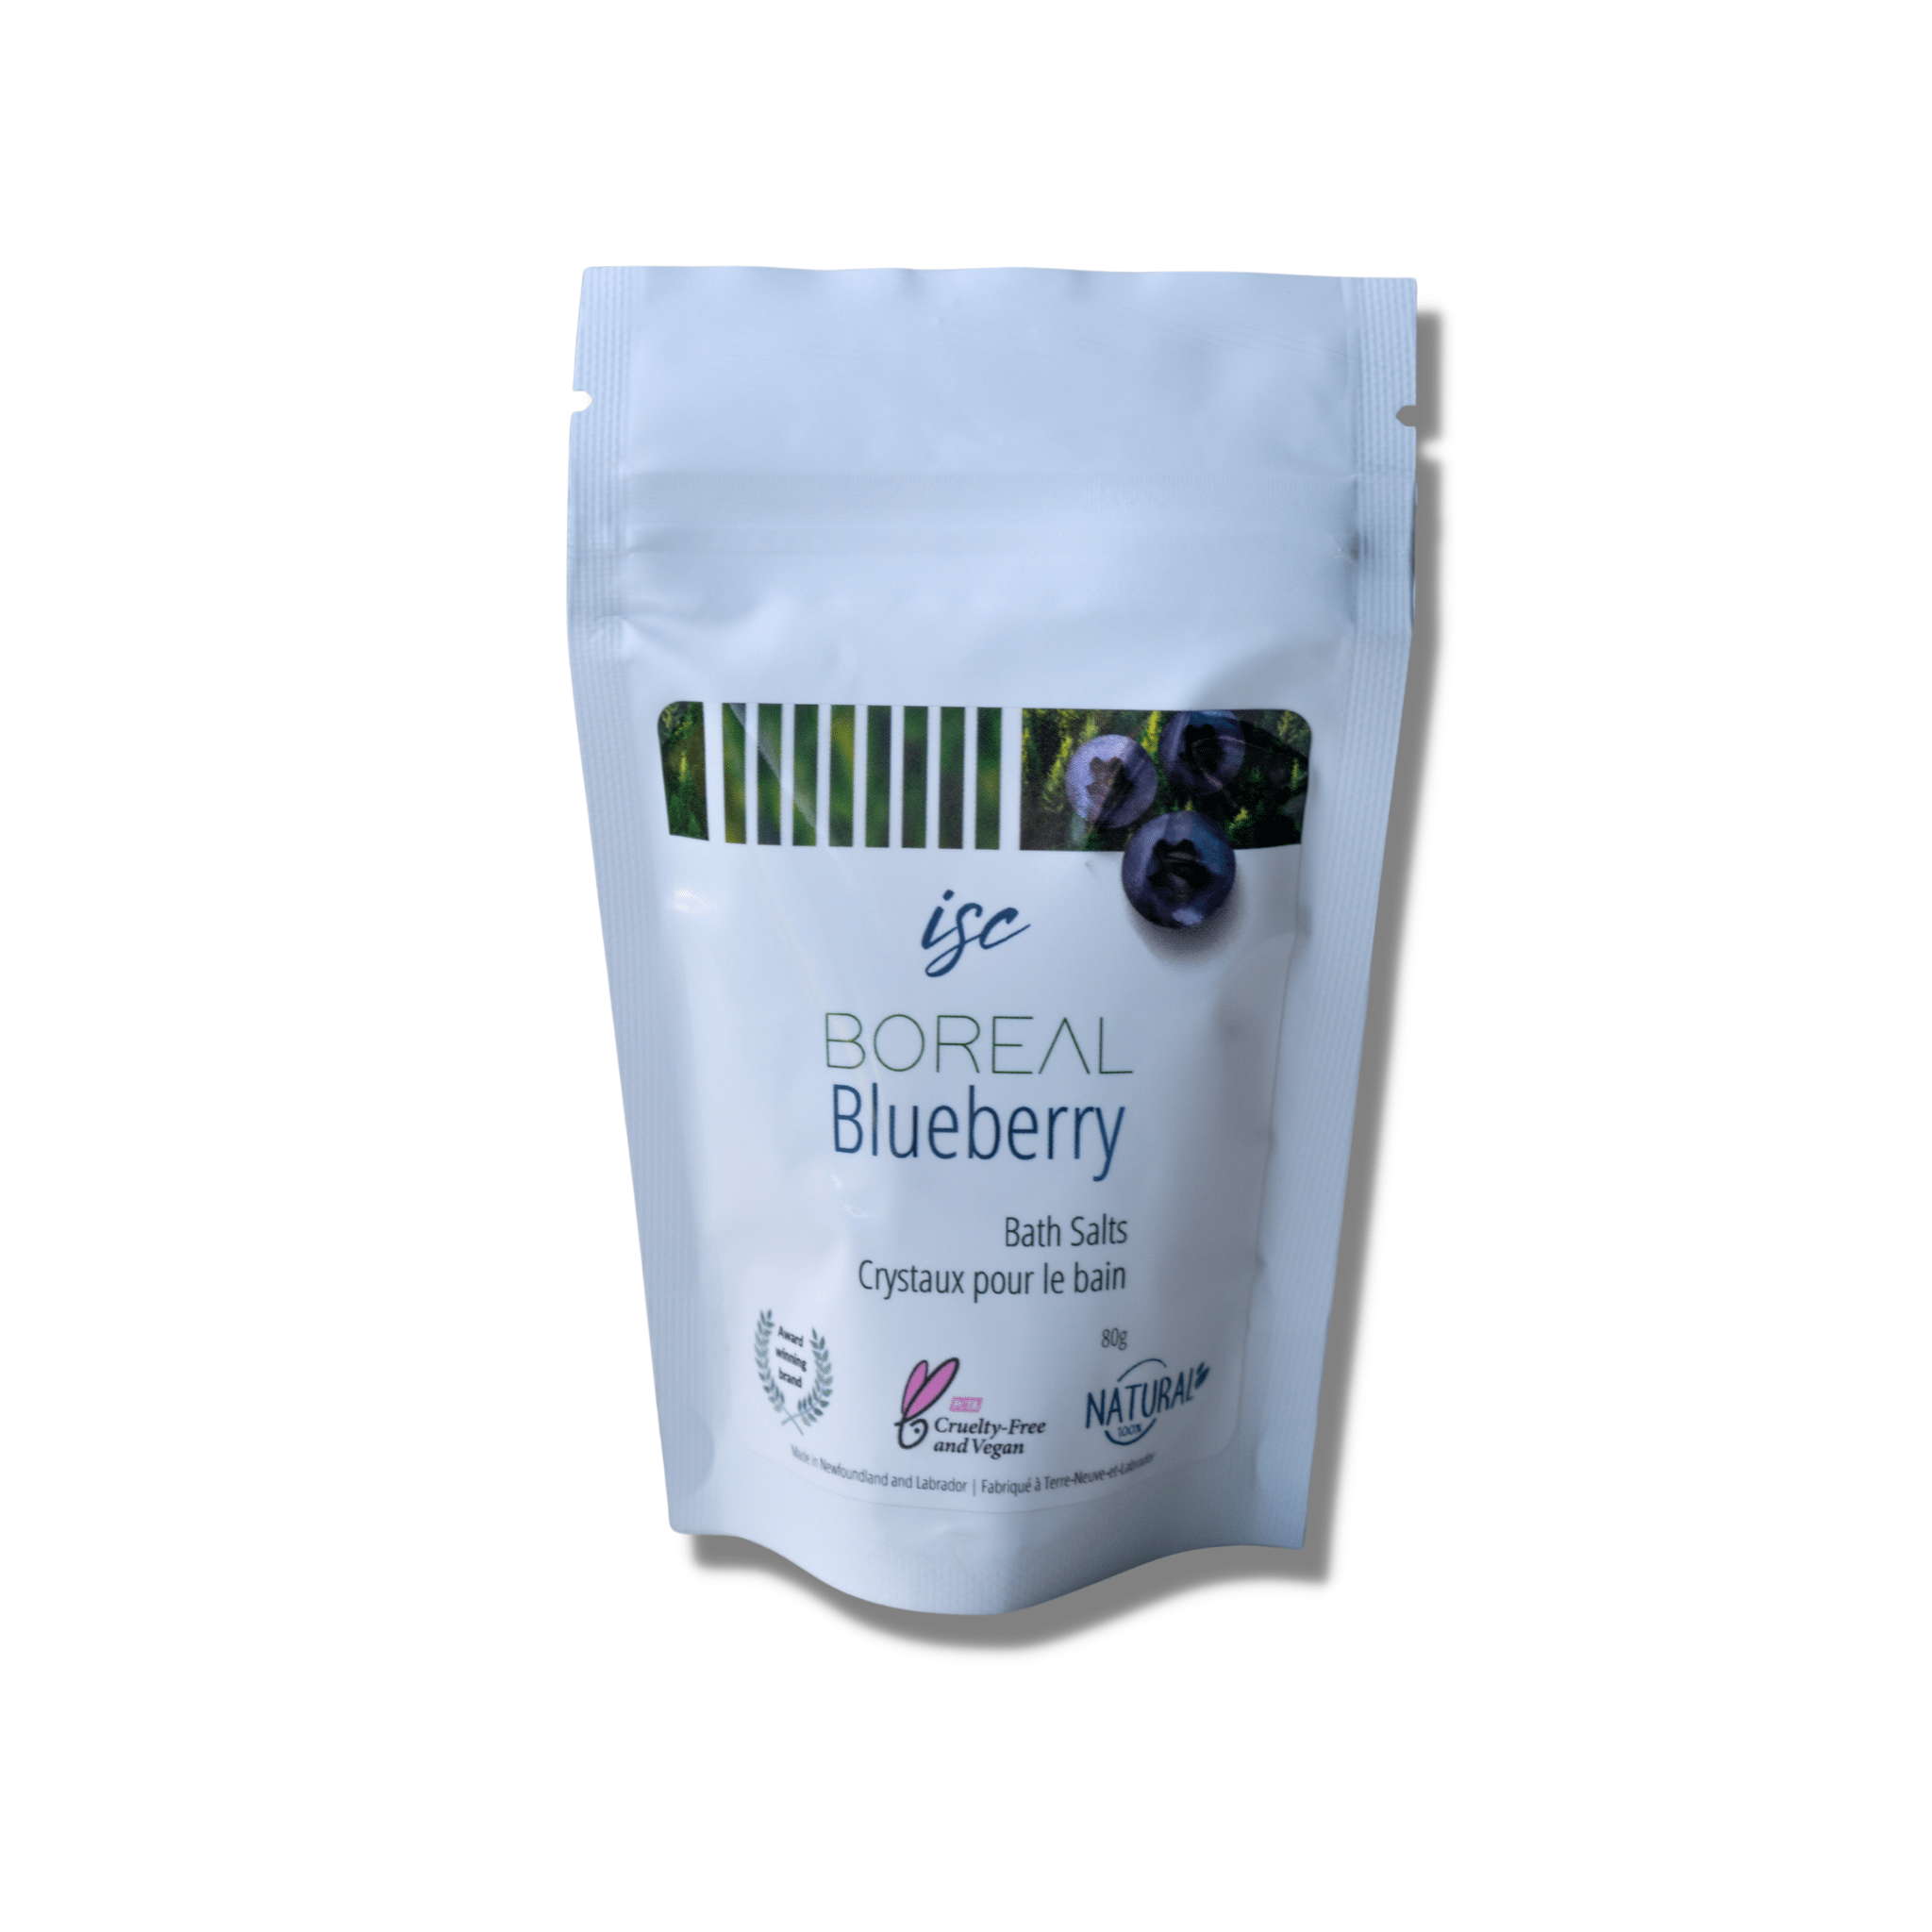 Blueberry Bath Salts, the benefits of blueberry for skin are reduced redness with continued use.